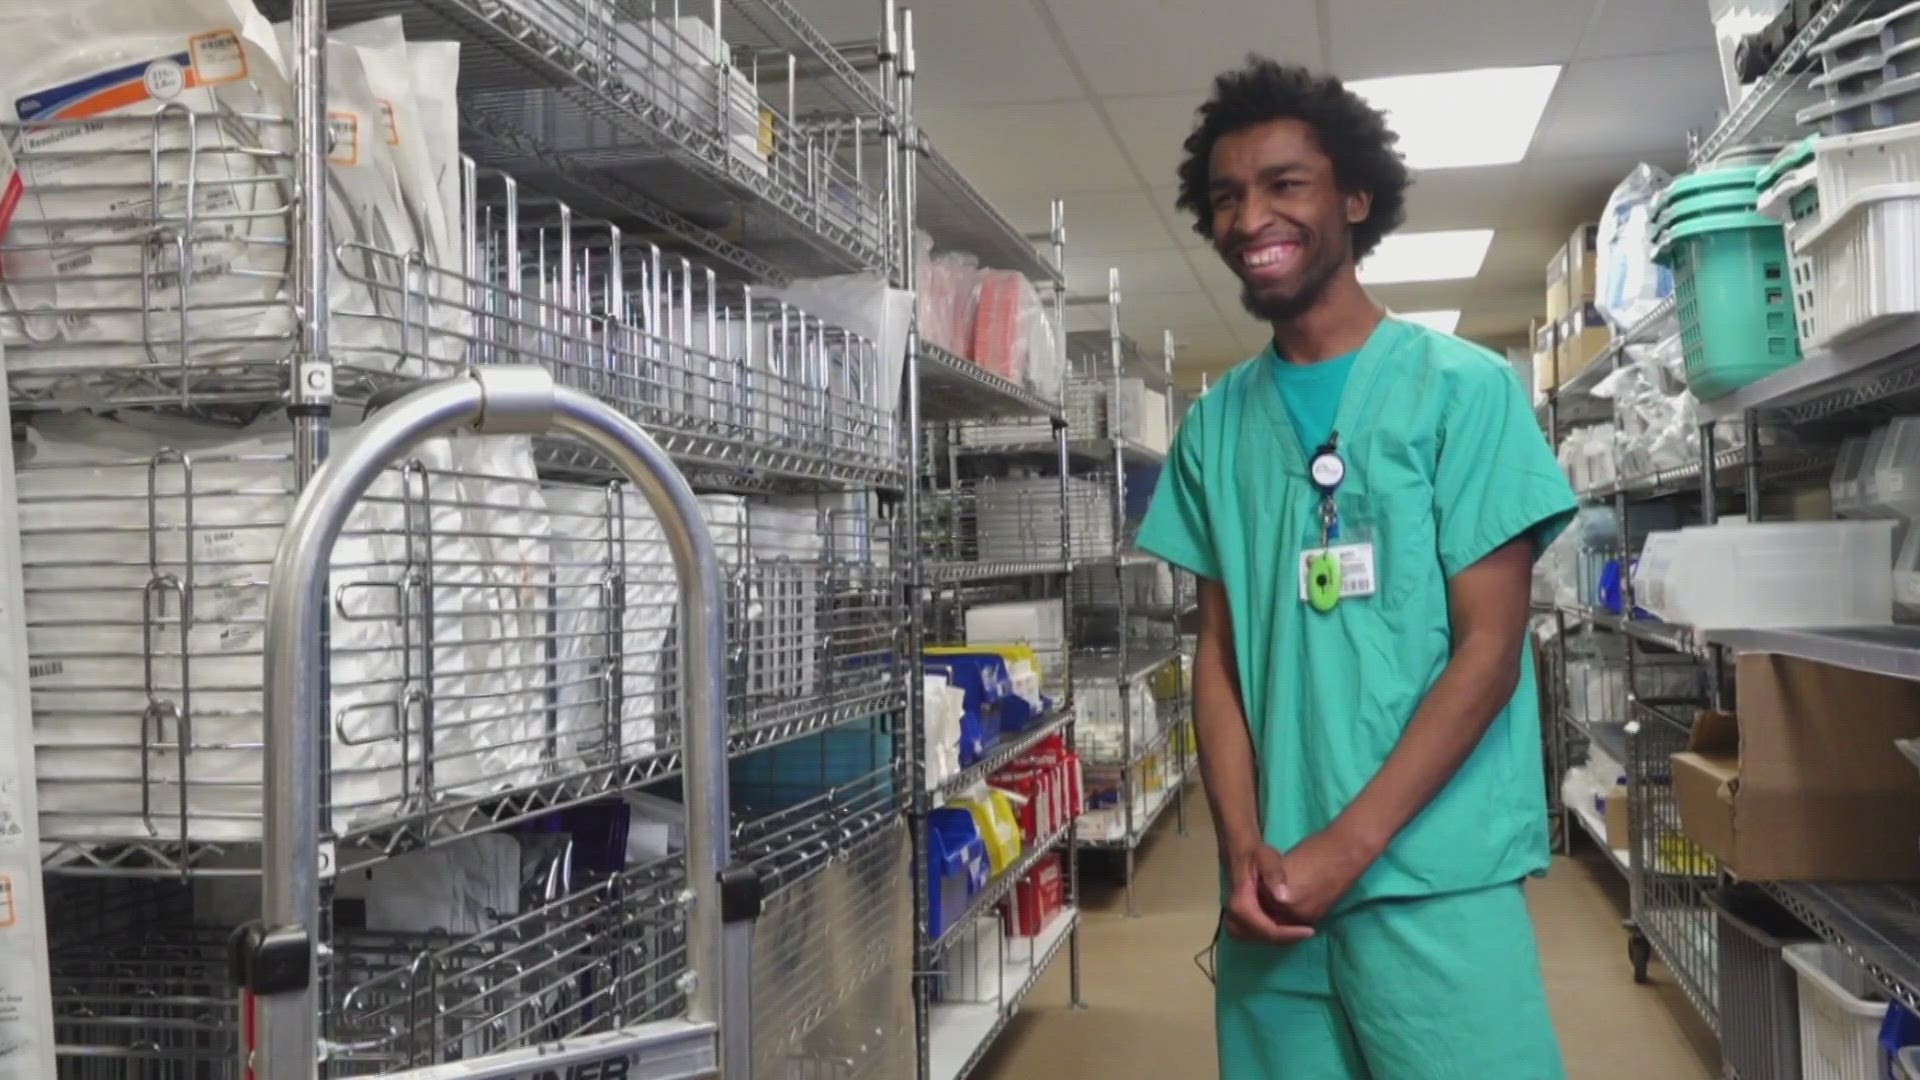 Behind the scenes in Parkwest Hospital, there are many people ensuring things run smoothly but one employee in particular takes the cake for work ethic.